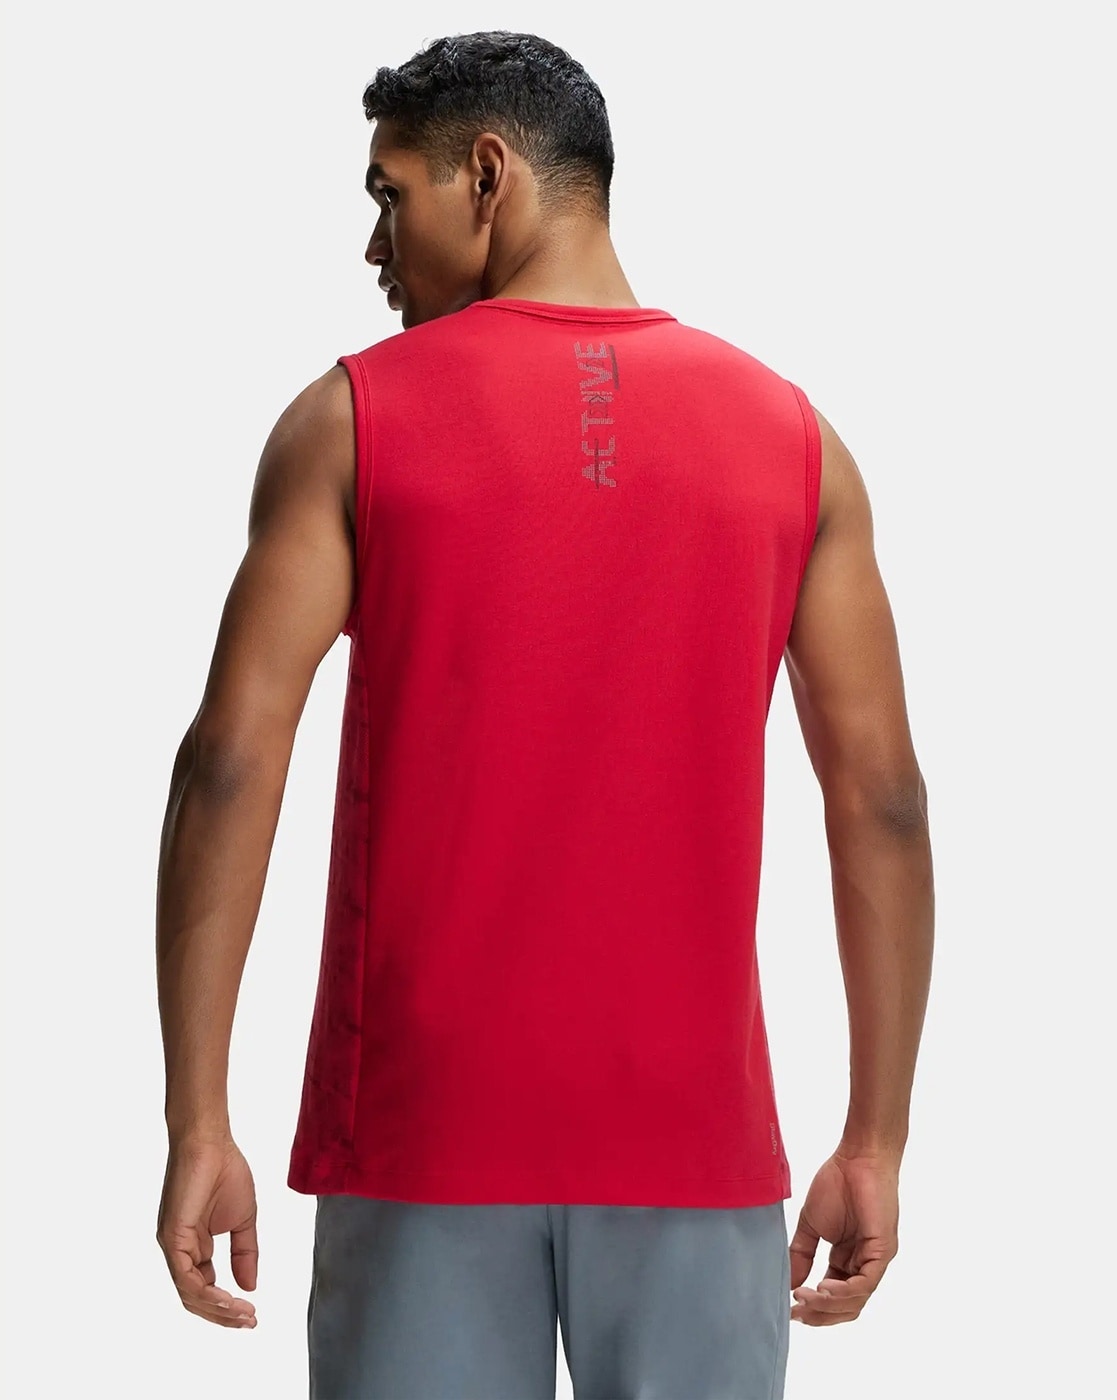 Men's Super Combed Cotton Blend Breathable Mesh Sleeveless Muscle Tee with  Stay Fresh Treatment - Quite Shade